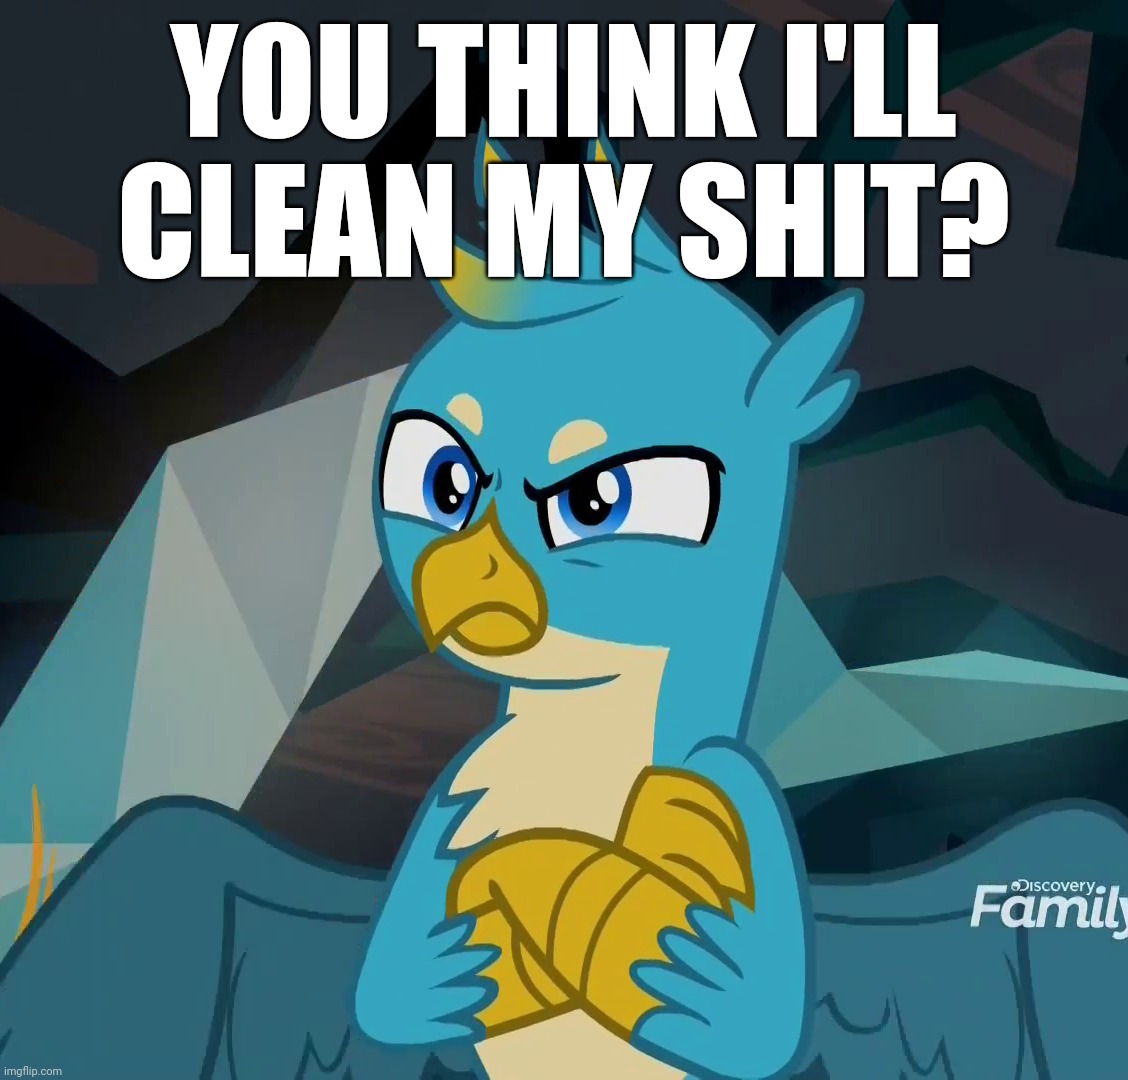 YOU THINK I'LL CLEAN MY SHIT? | made w/ Imgflip meme maker